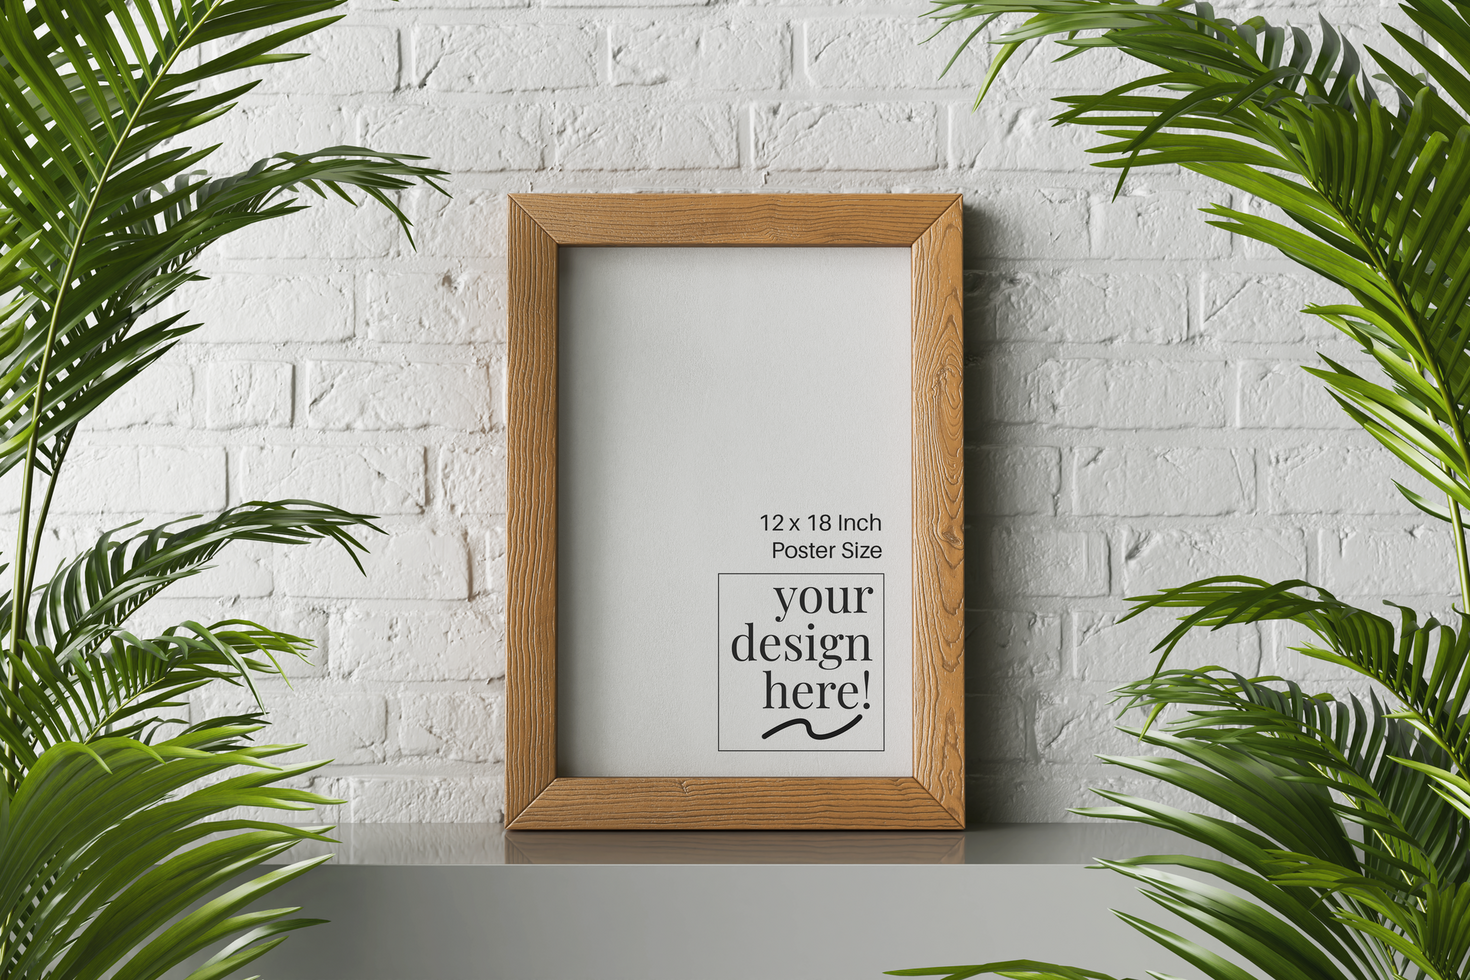 12x18 inch wooden frame portrait canvas paper small poster mockup sitting on table with brick wall modern contemporary interior psd